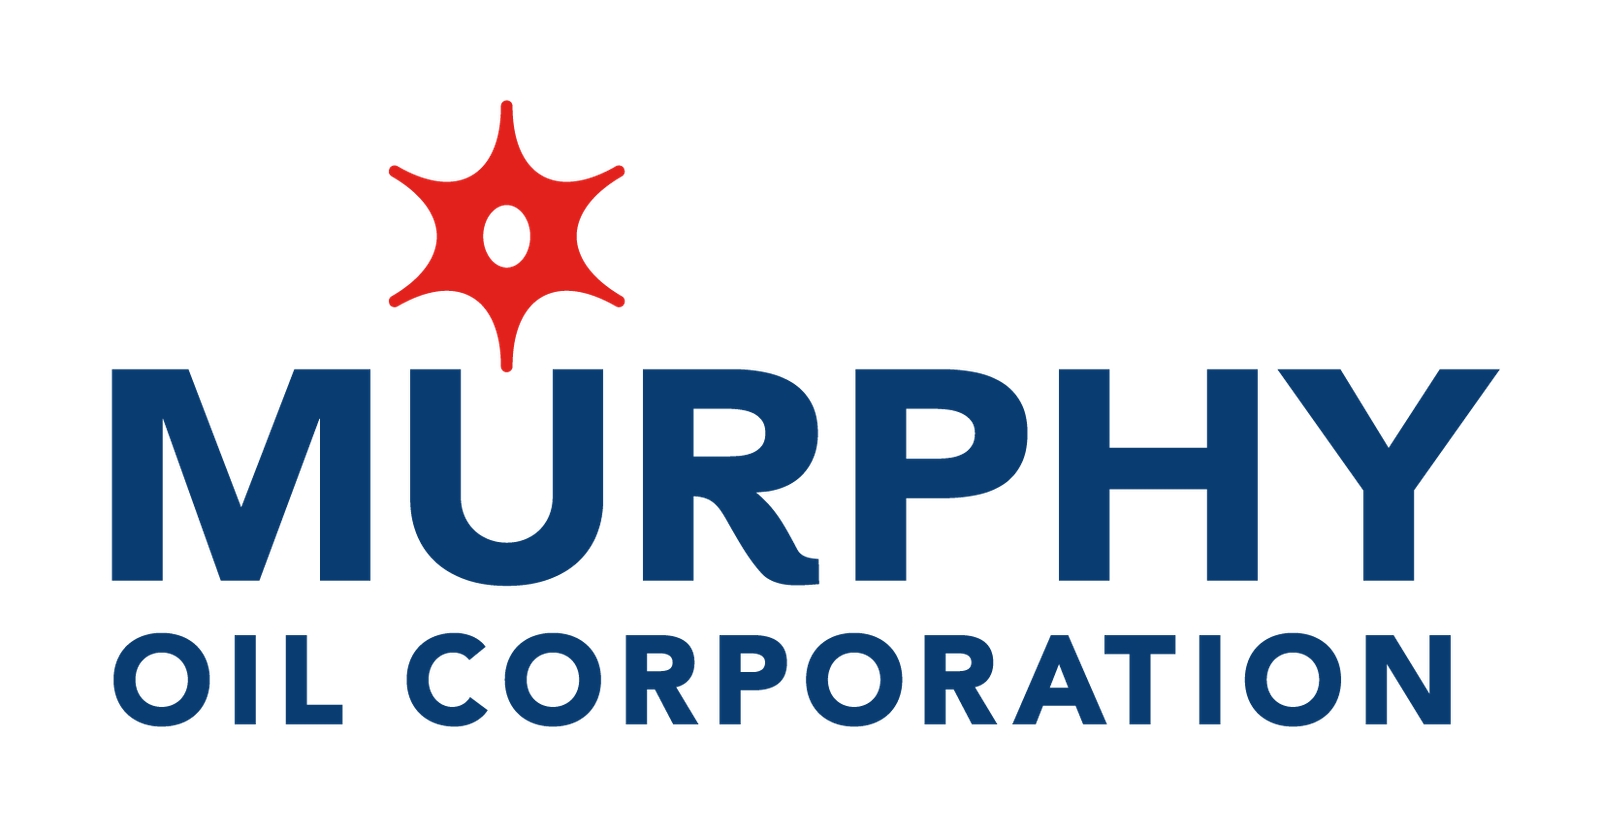 Logo of Murphy Oil Corporation featuring a stylized red asterisk above the bold blue text 'MURPHY', with 'OIL CORPORATION' underneath in smaller capital letters, representing the company's prominence in the oil and gas industry.